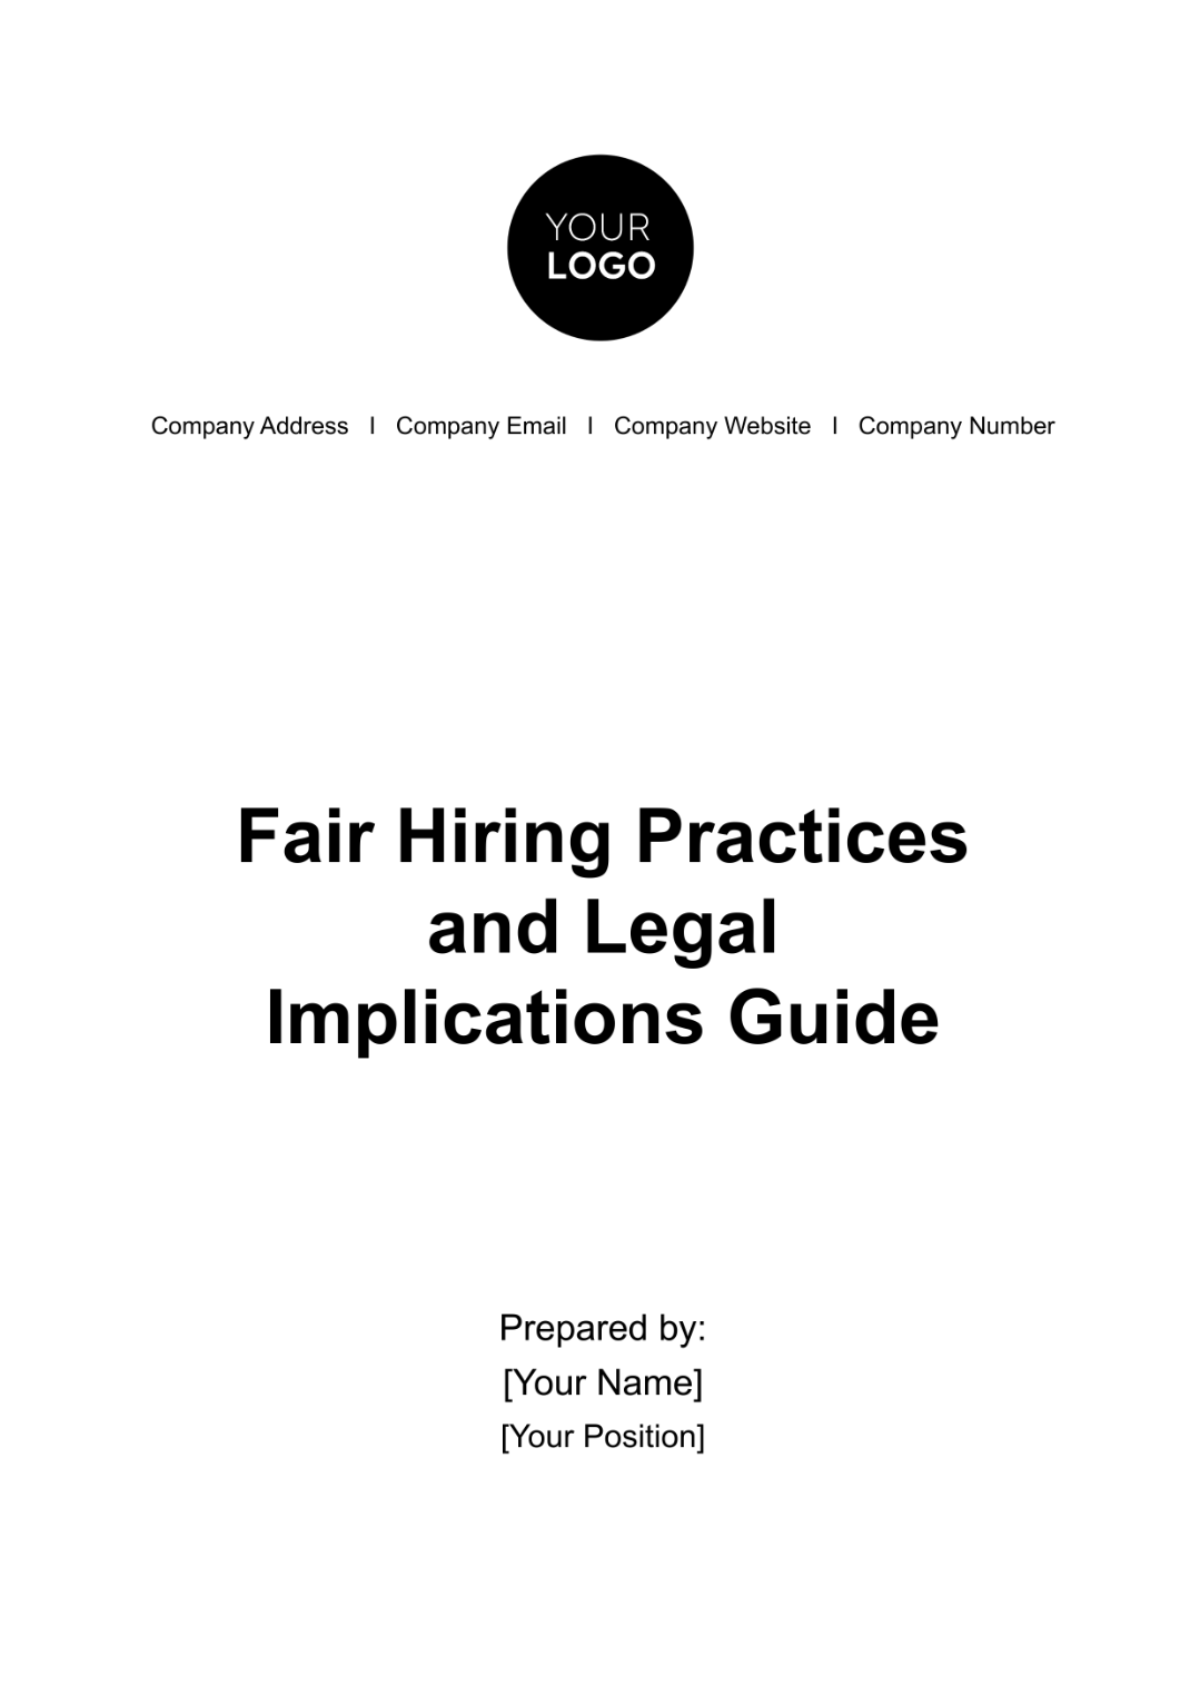 Fair Hiring Practices and Legal Implications Guide HR Template